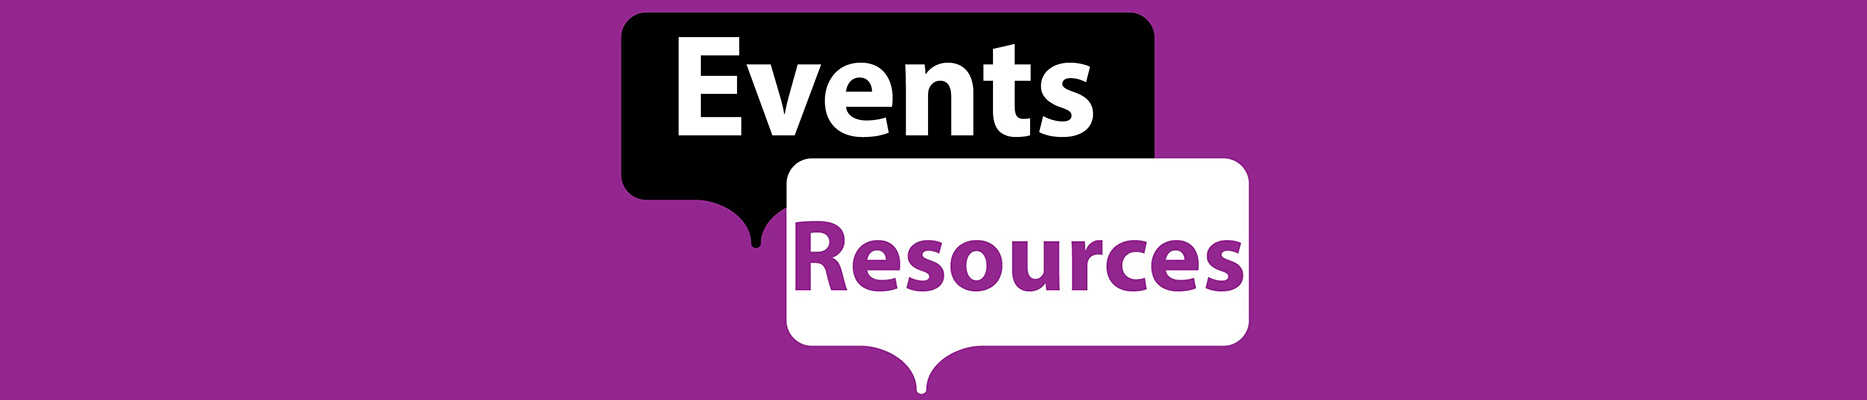 events resources banner